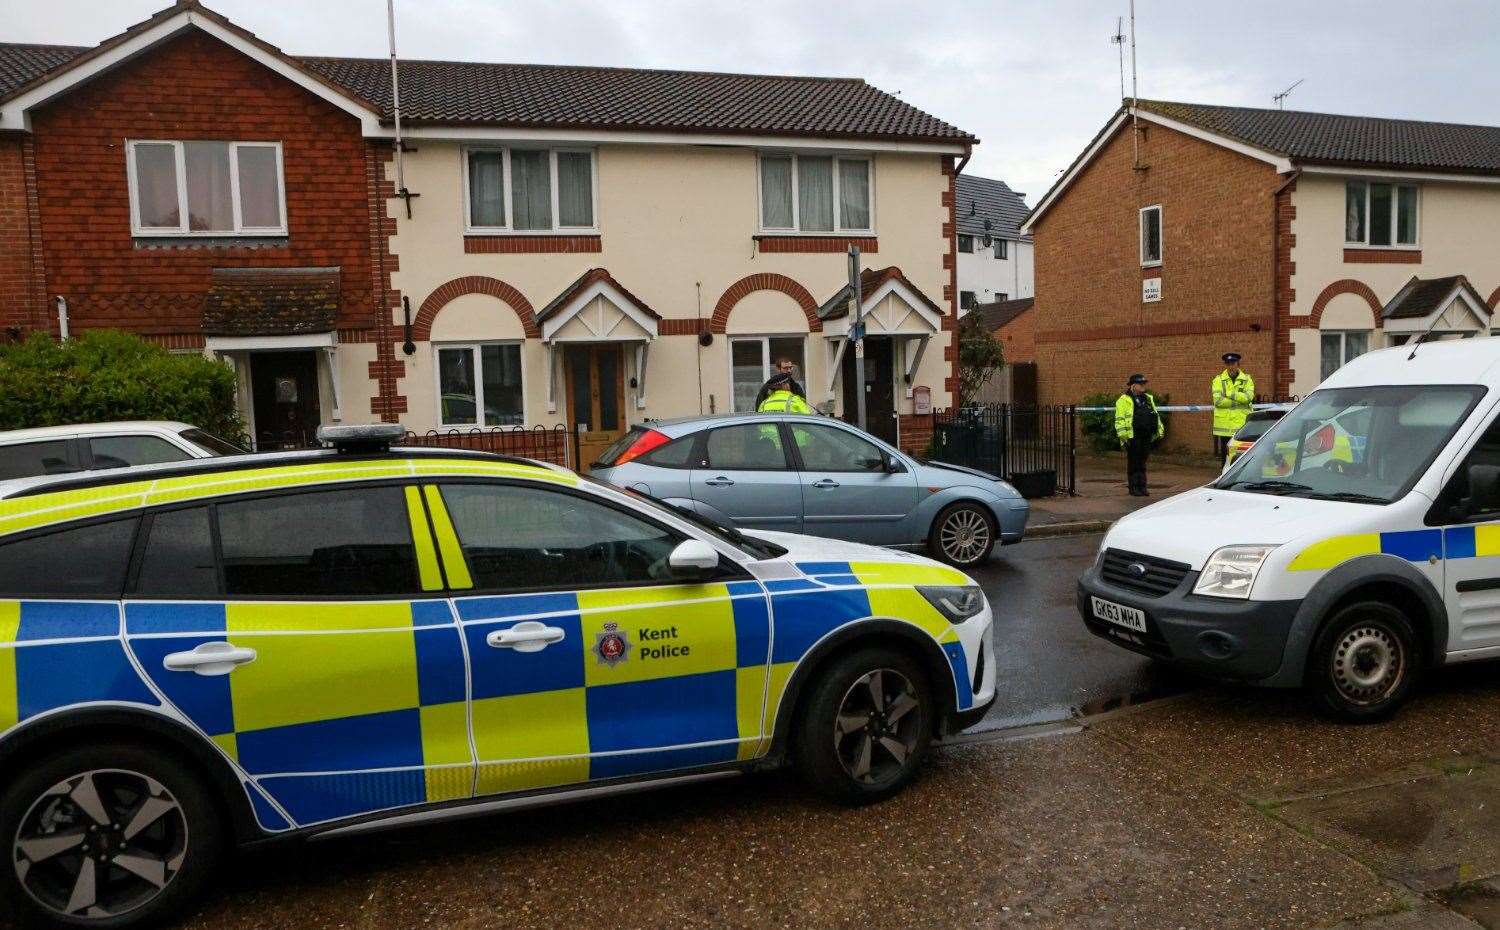 Police at the scene after the firearms incident. Picture: UKNIP